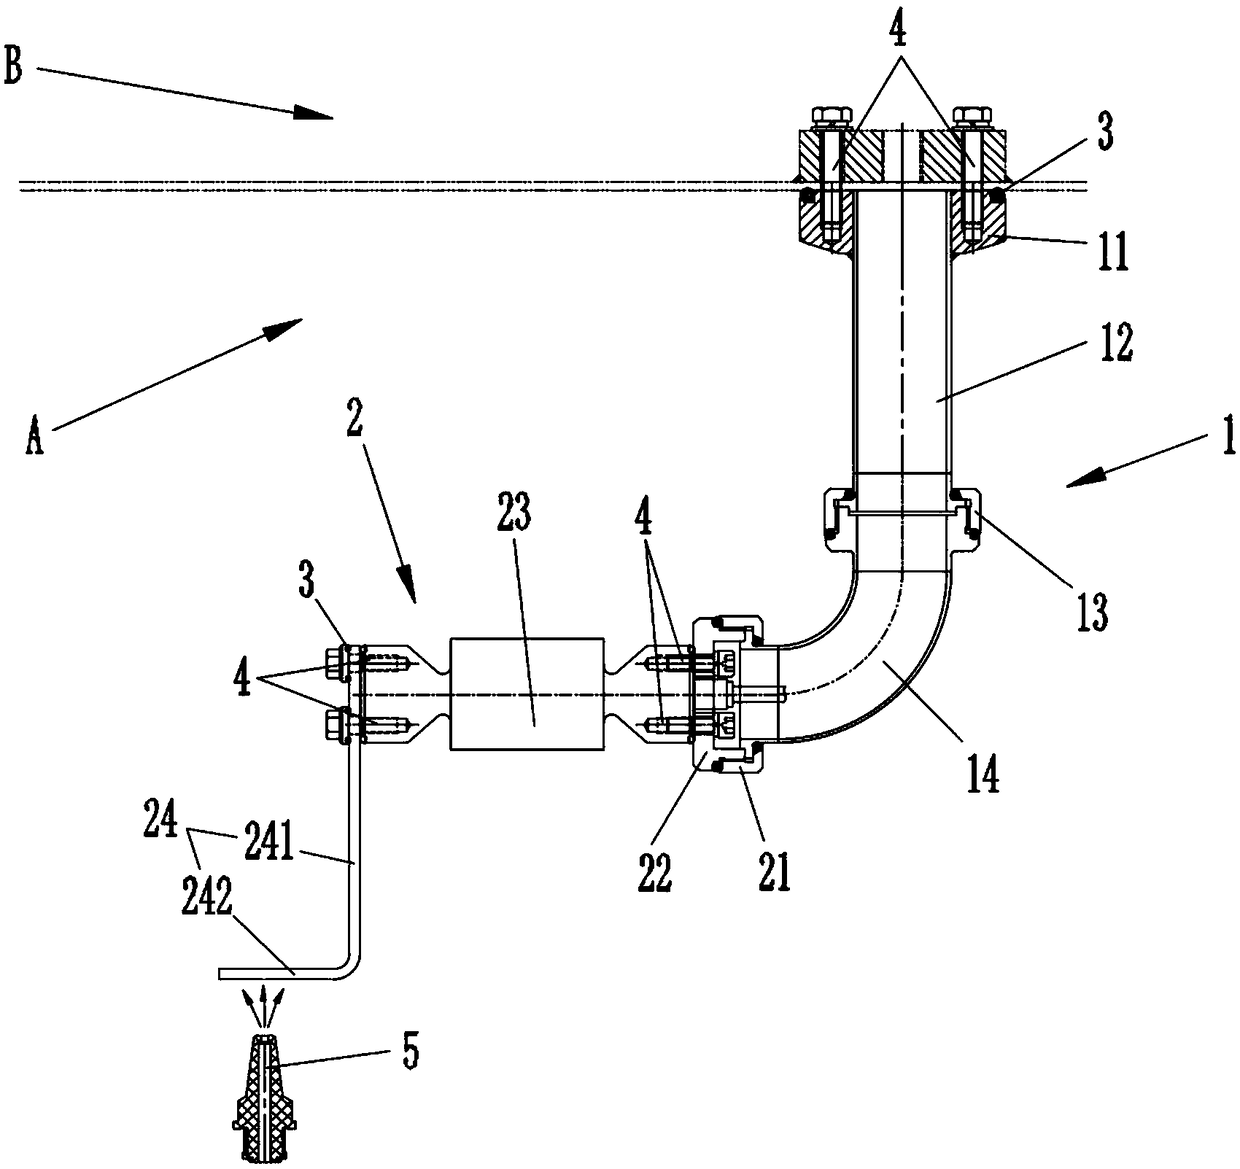 Spray pressure detection device and sterile filling production system